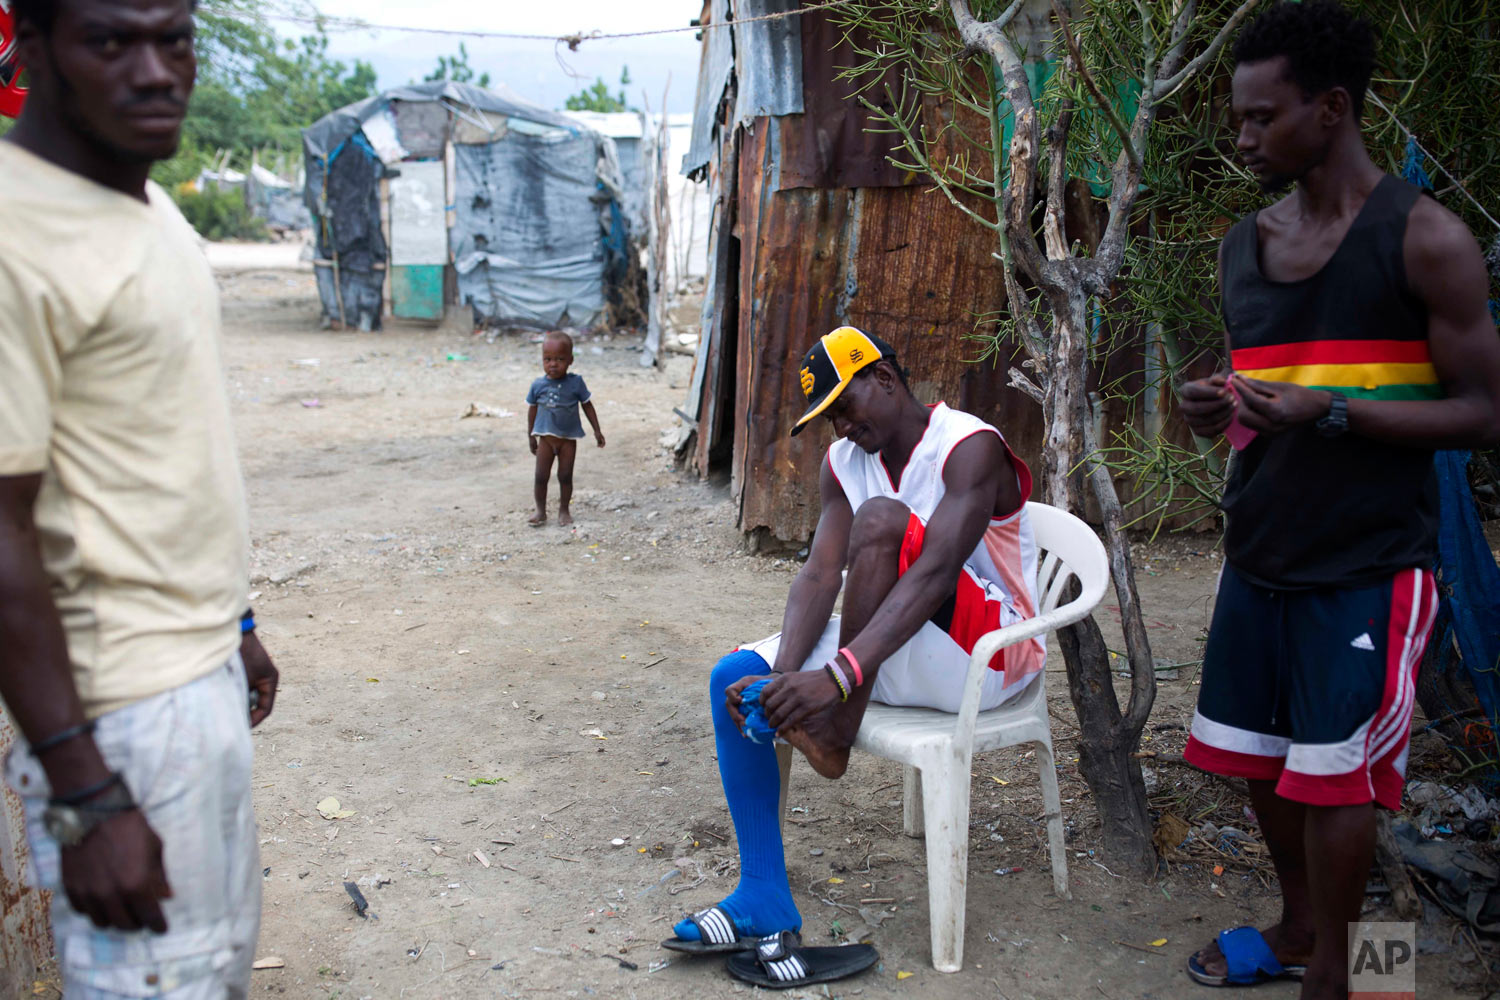  Changlair Aristide, who coaches a soccer team made up mostly of trash scavengers, gets ready to play a game. Aug. 29, 2018. (AP Photo/Dieu Nalio Chery) 